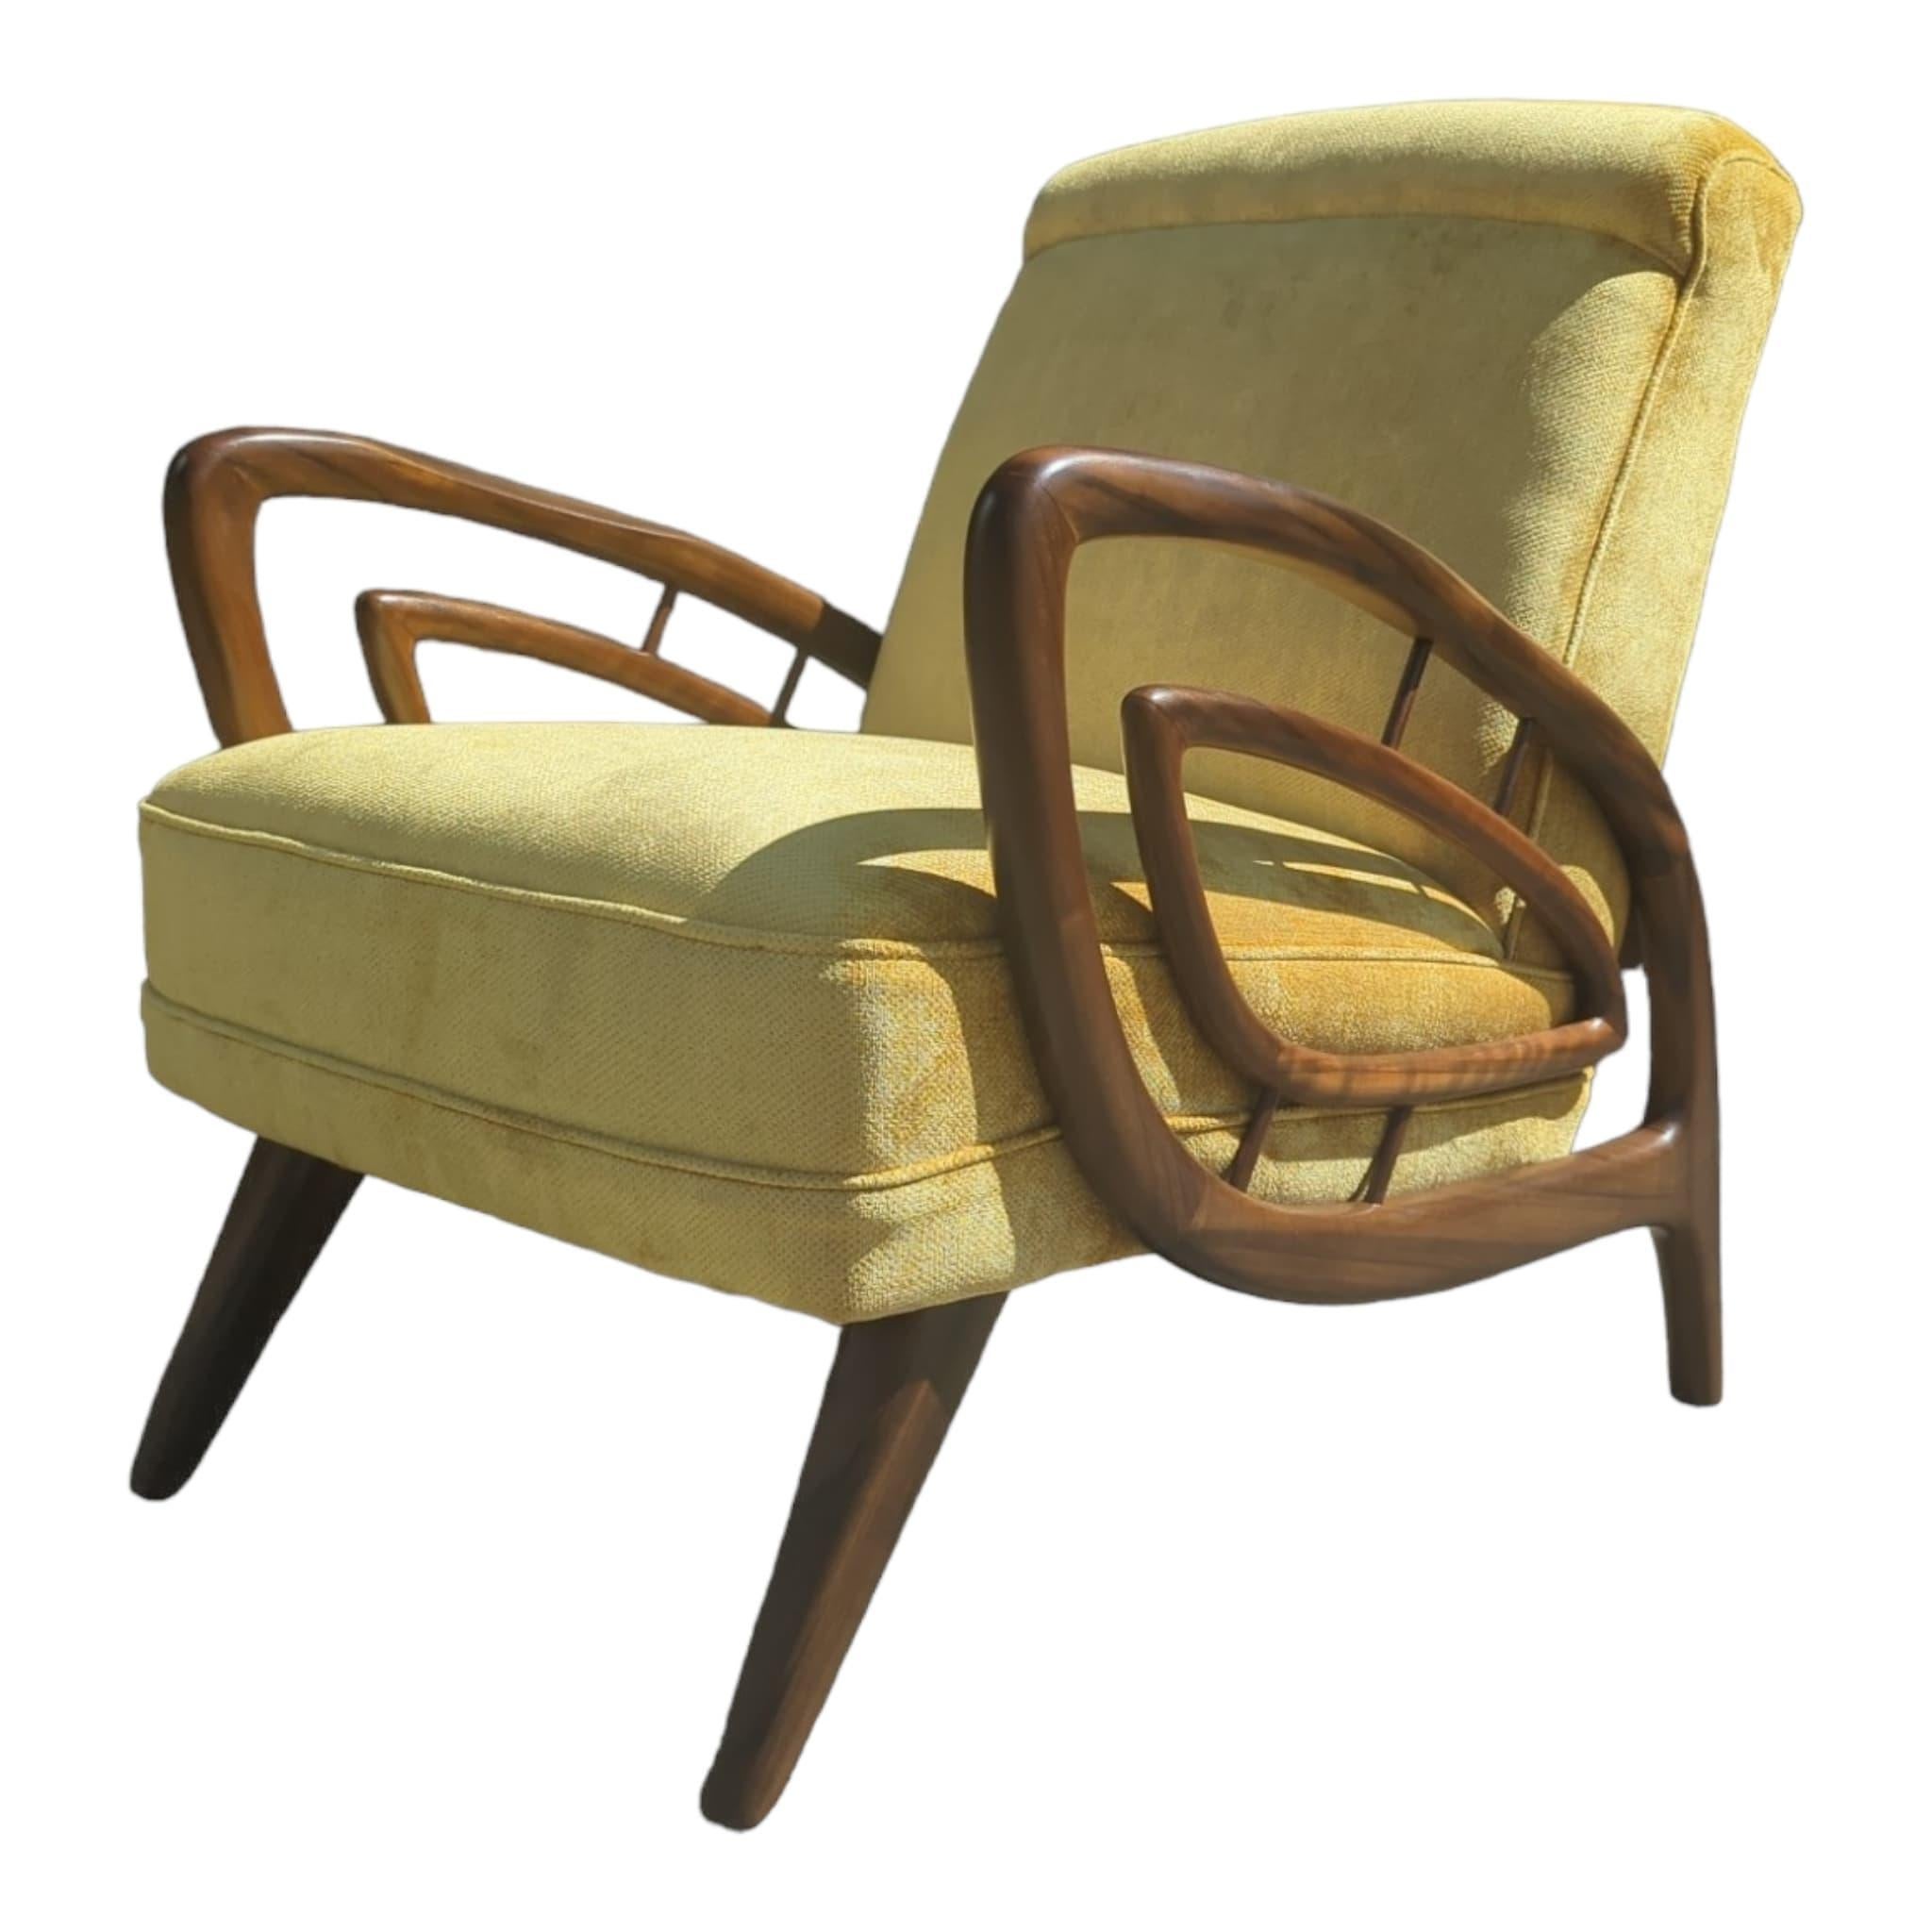 Product Description Title:
Authentic Rudowski armchair fully restored mustard velvet blackbean and timber. No expense has been spent on this tier 1 furniture artisan Rudowski. We have spent hours on end to get this restored to an original condition